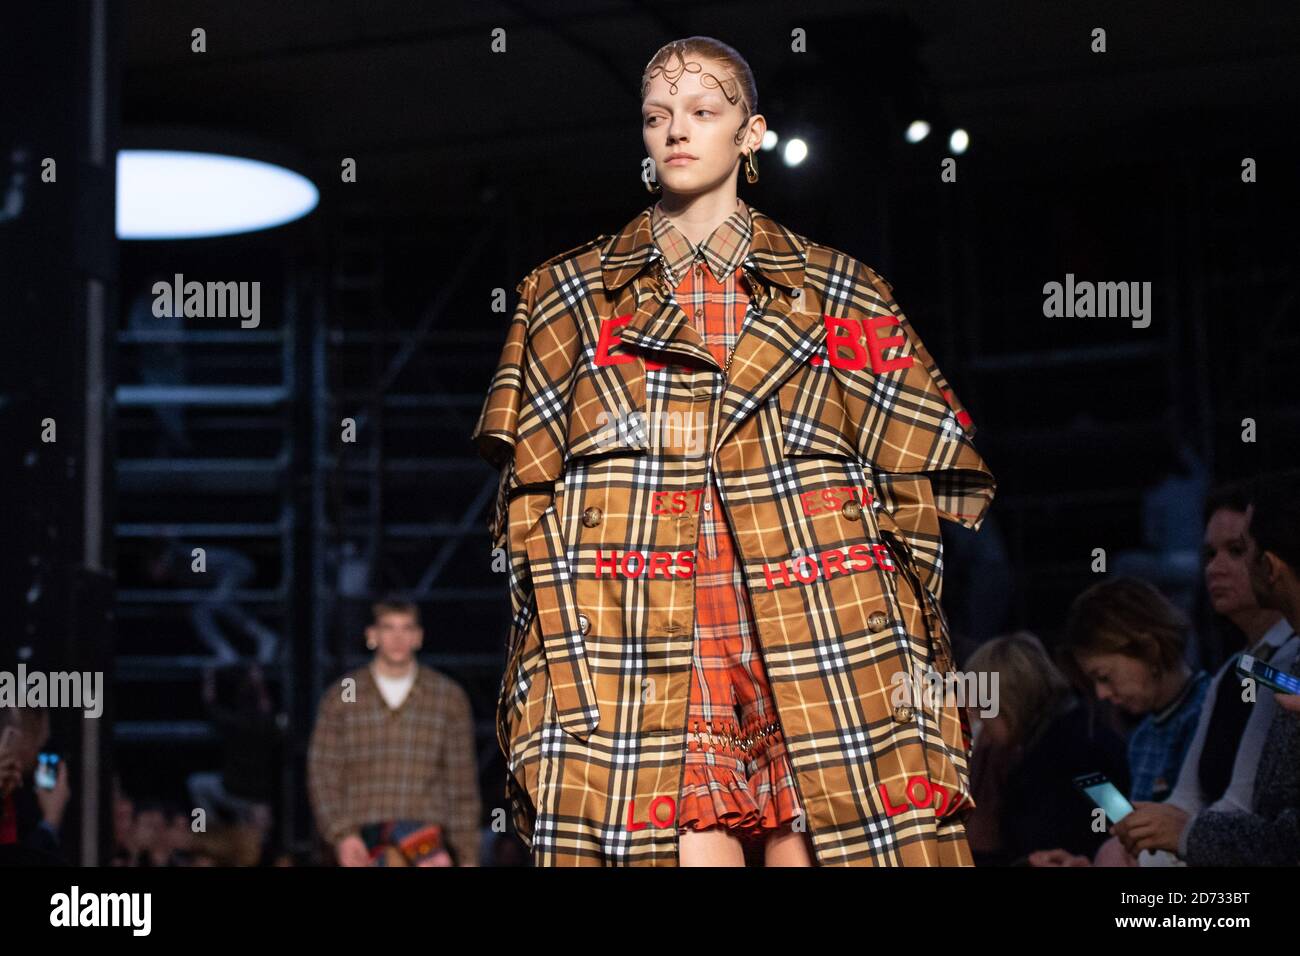 Models on the catwalk during the Burberry fashion show, held at Tate Modern, as part of London Fashion Week A/W 2019. Picture date: Sunday February 17, 2018. Photo credit should read: Matt Crossick/Empics Stock Photo